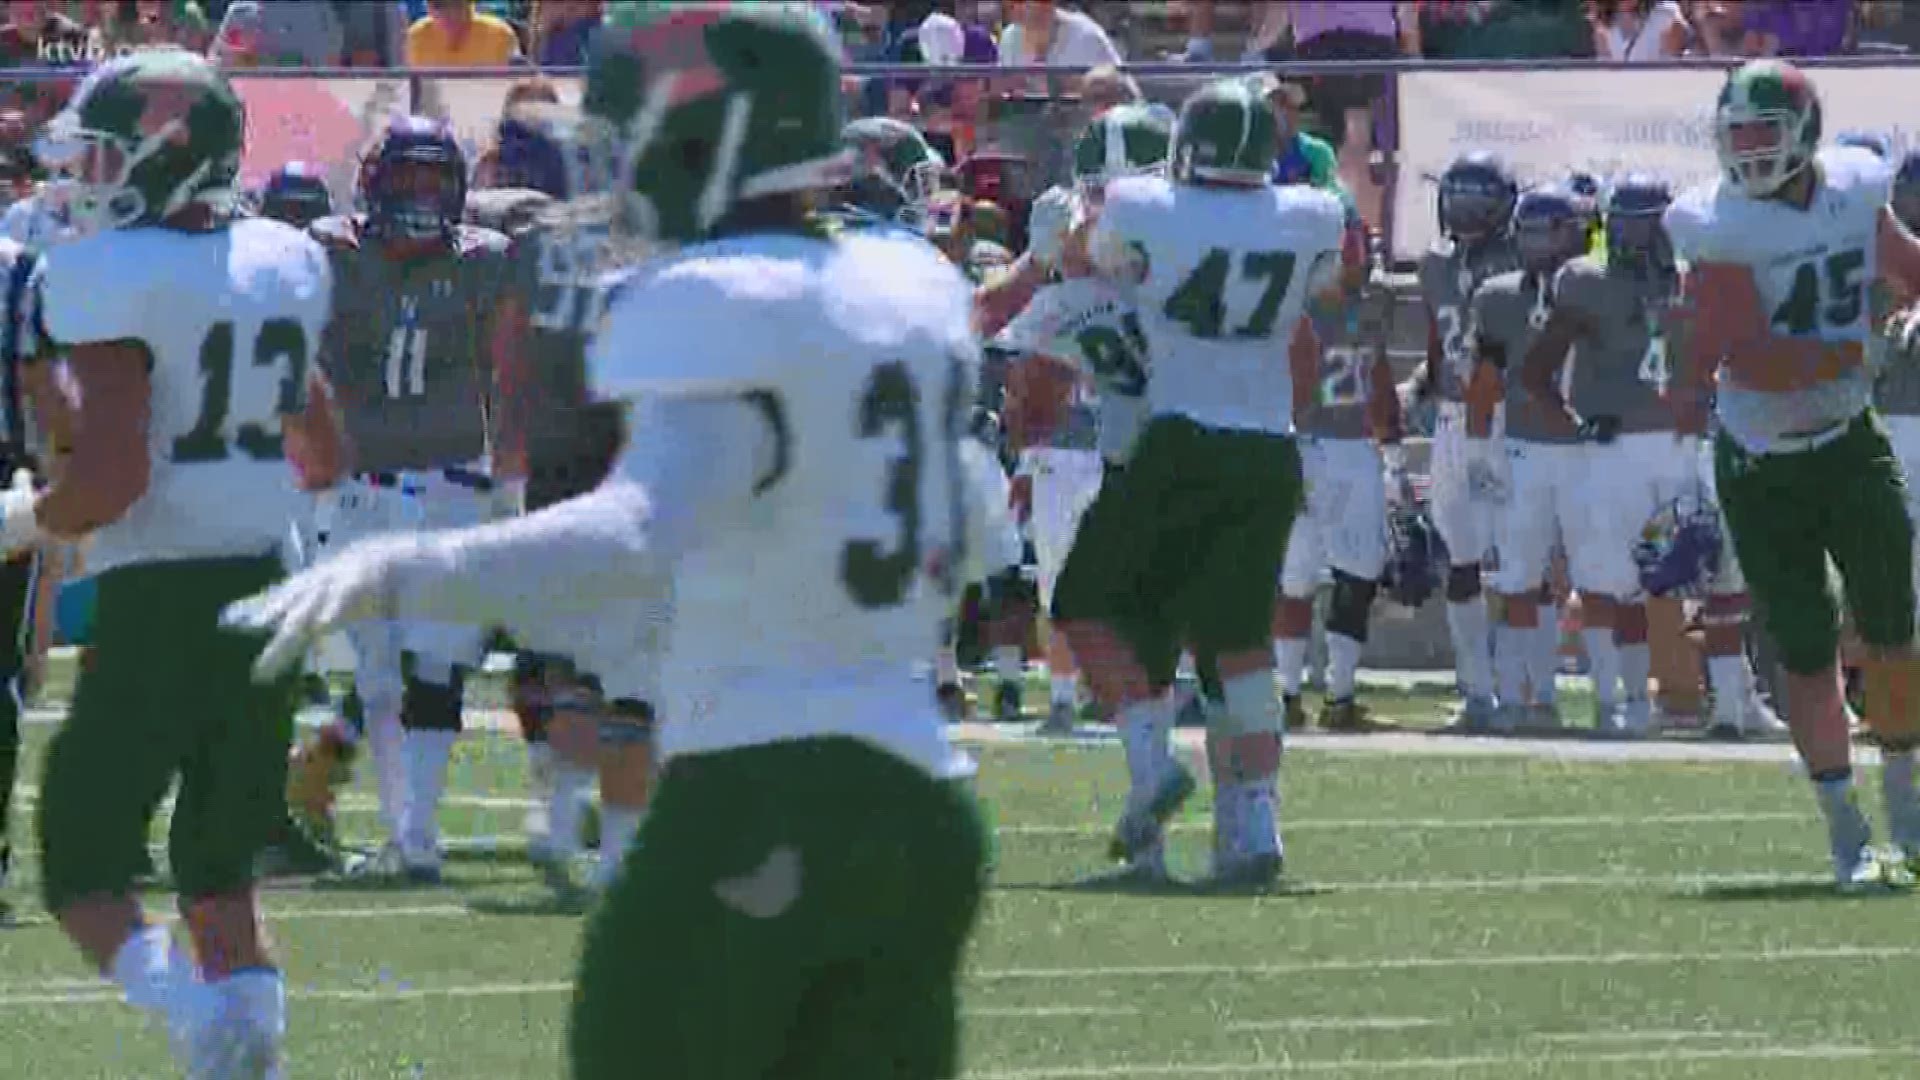 The College of Idaho Yotes fell to Montana Tech 36-16 at their 2018 home opener 9/1/2018.